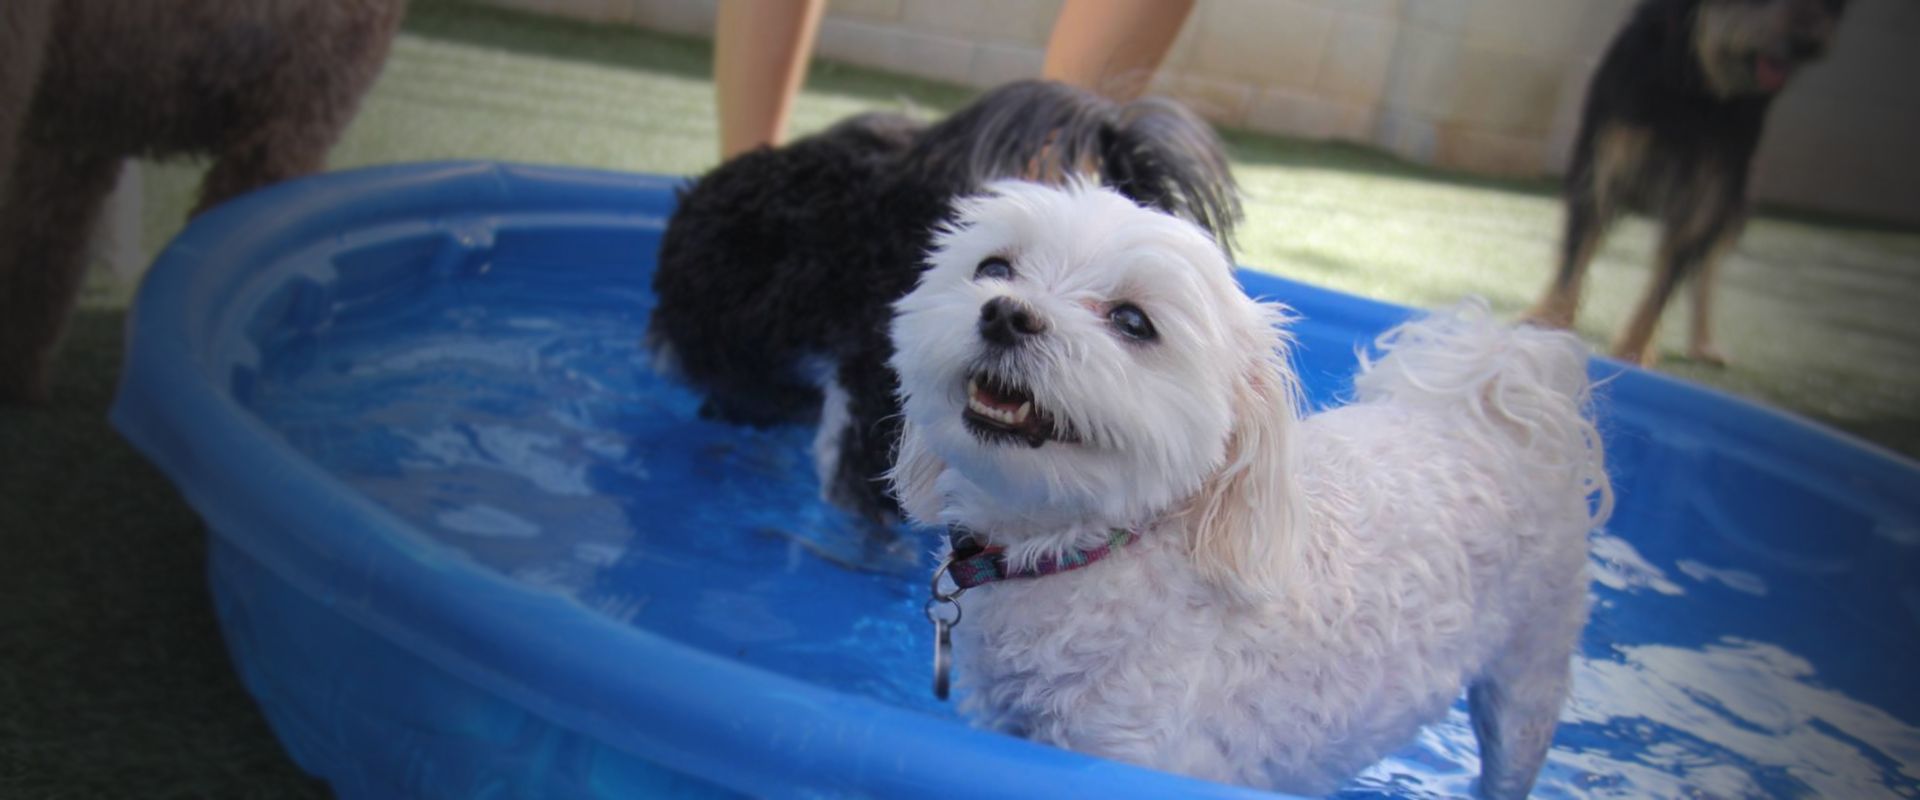 furry white dog playing on a small pool